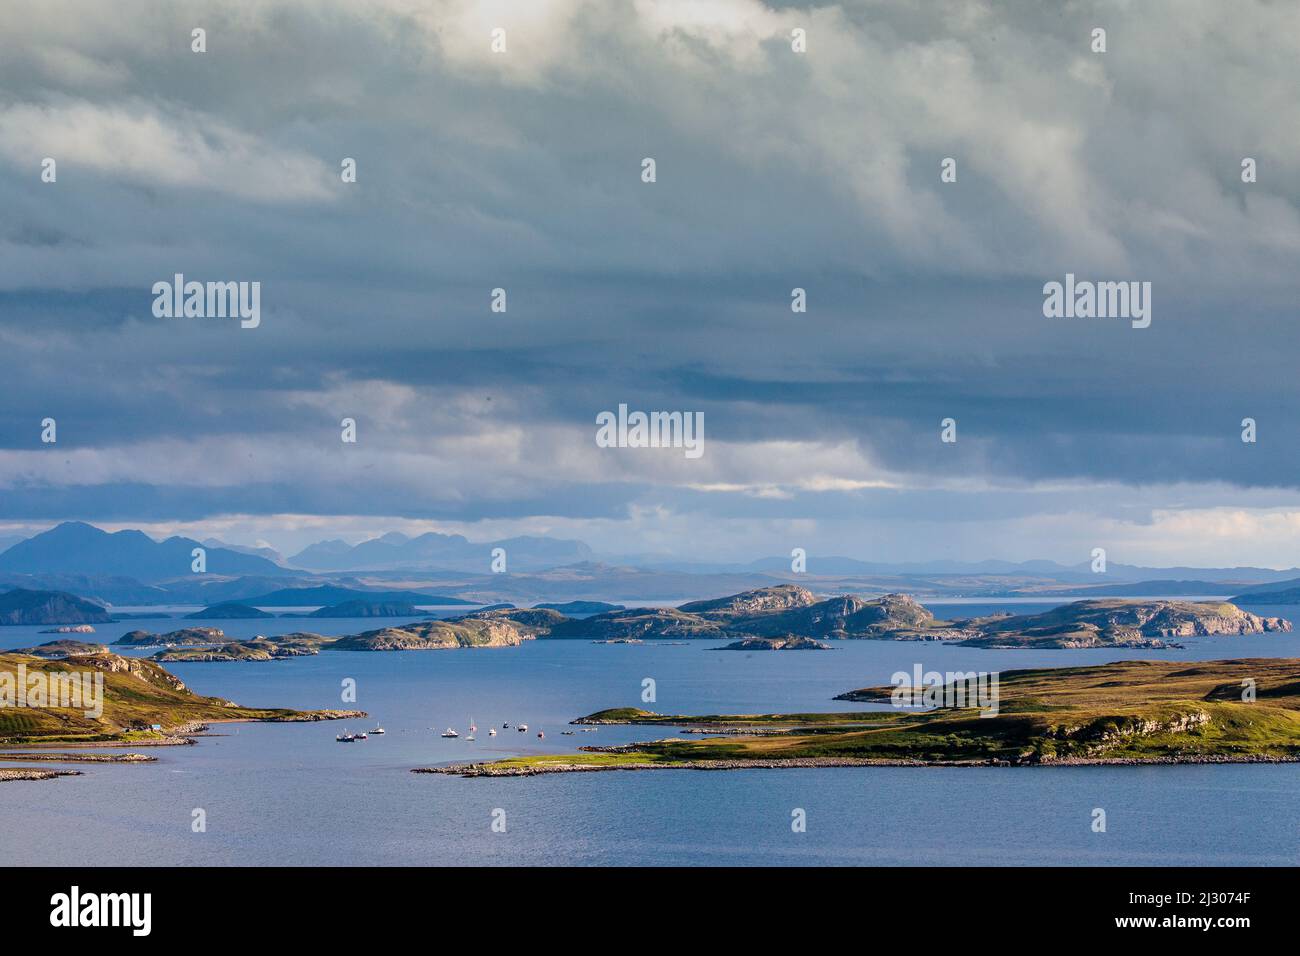 View from Coigach Peninsula, Archipelago, Tangle of Summer Isles, Wester Ross, Scotland, UK Stock Photo